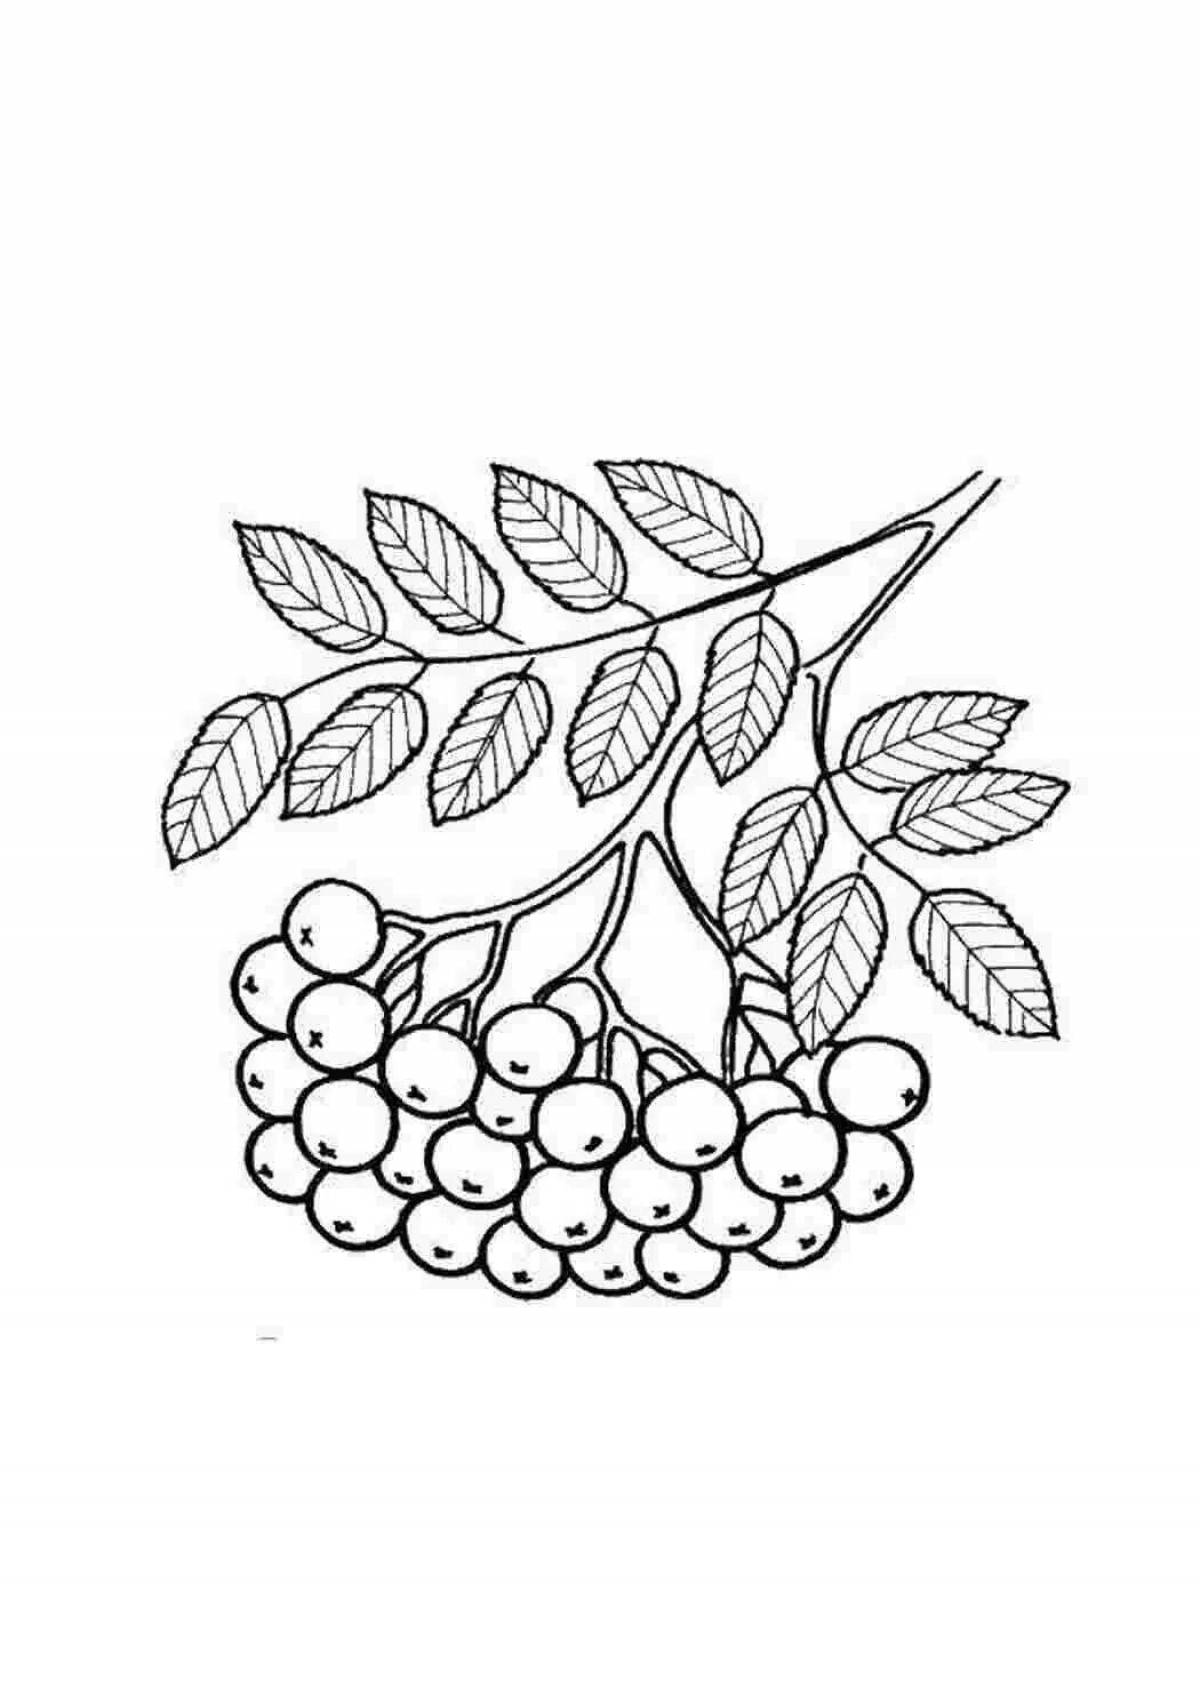 Bright pok coloring page